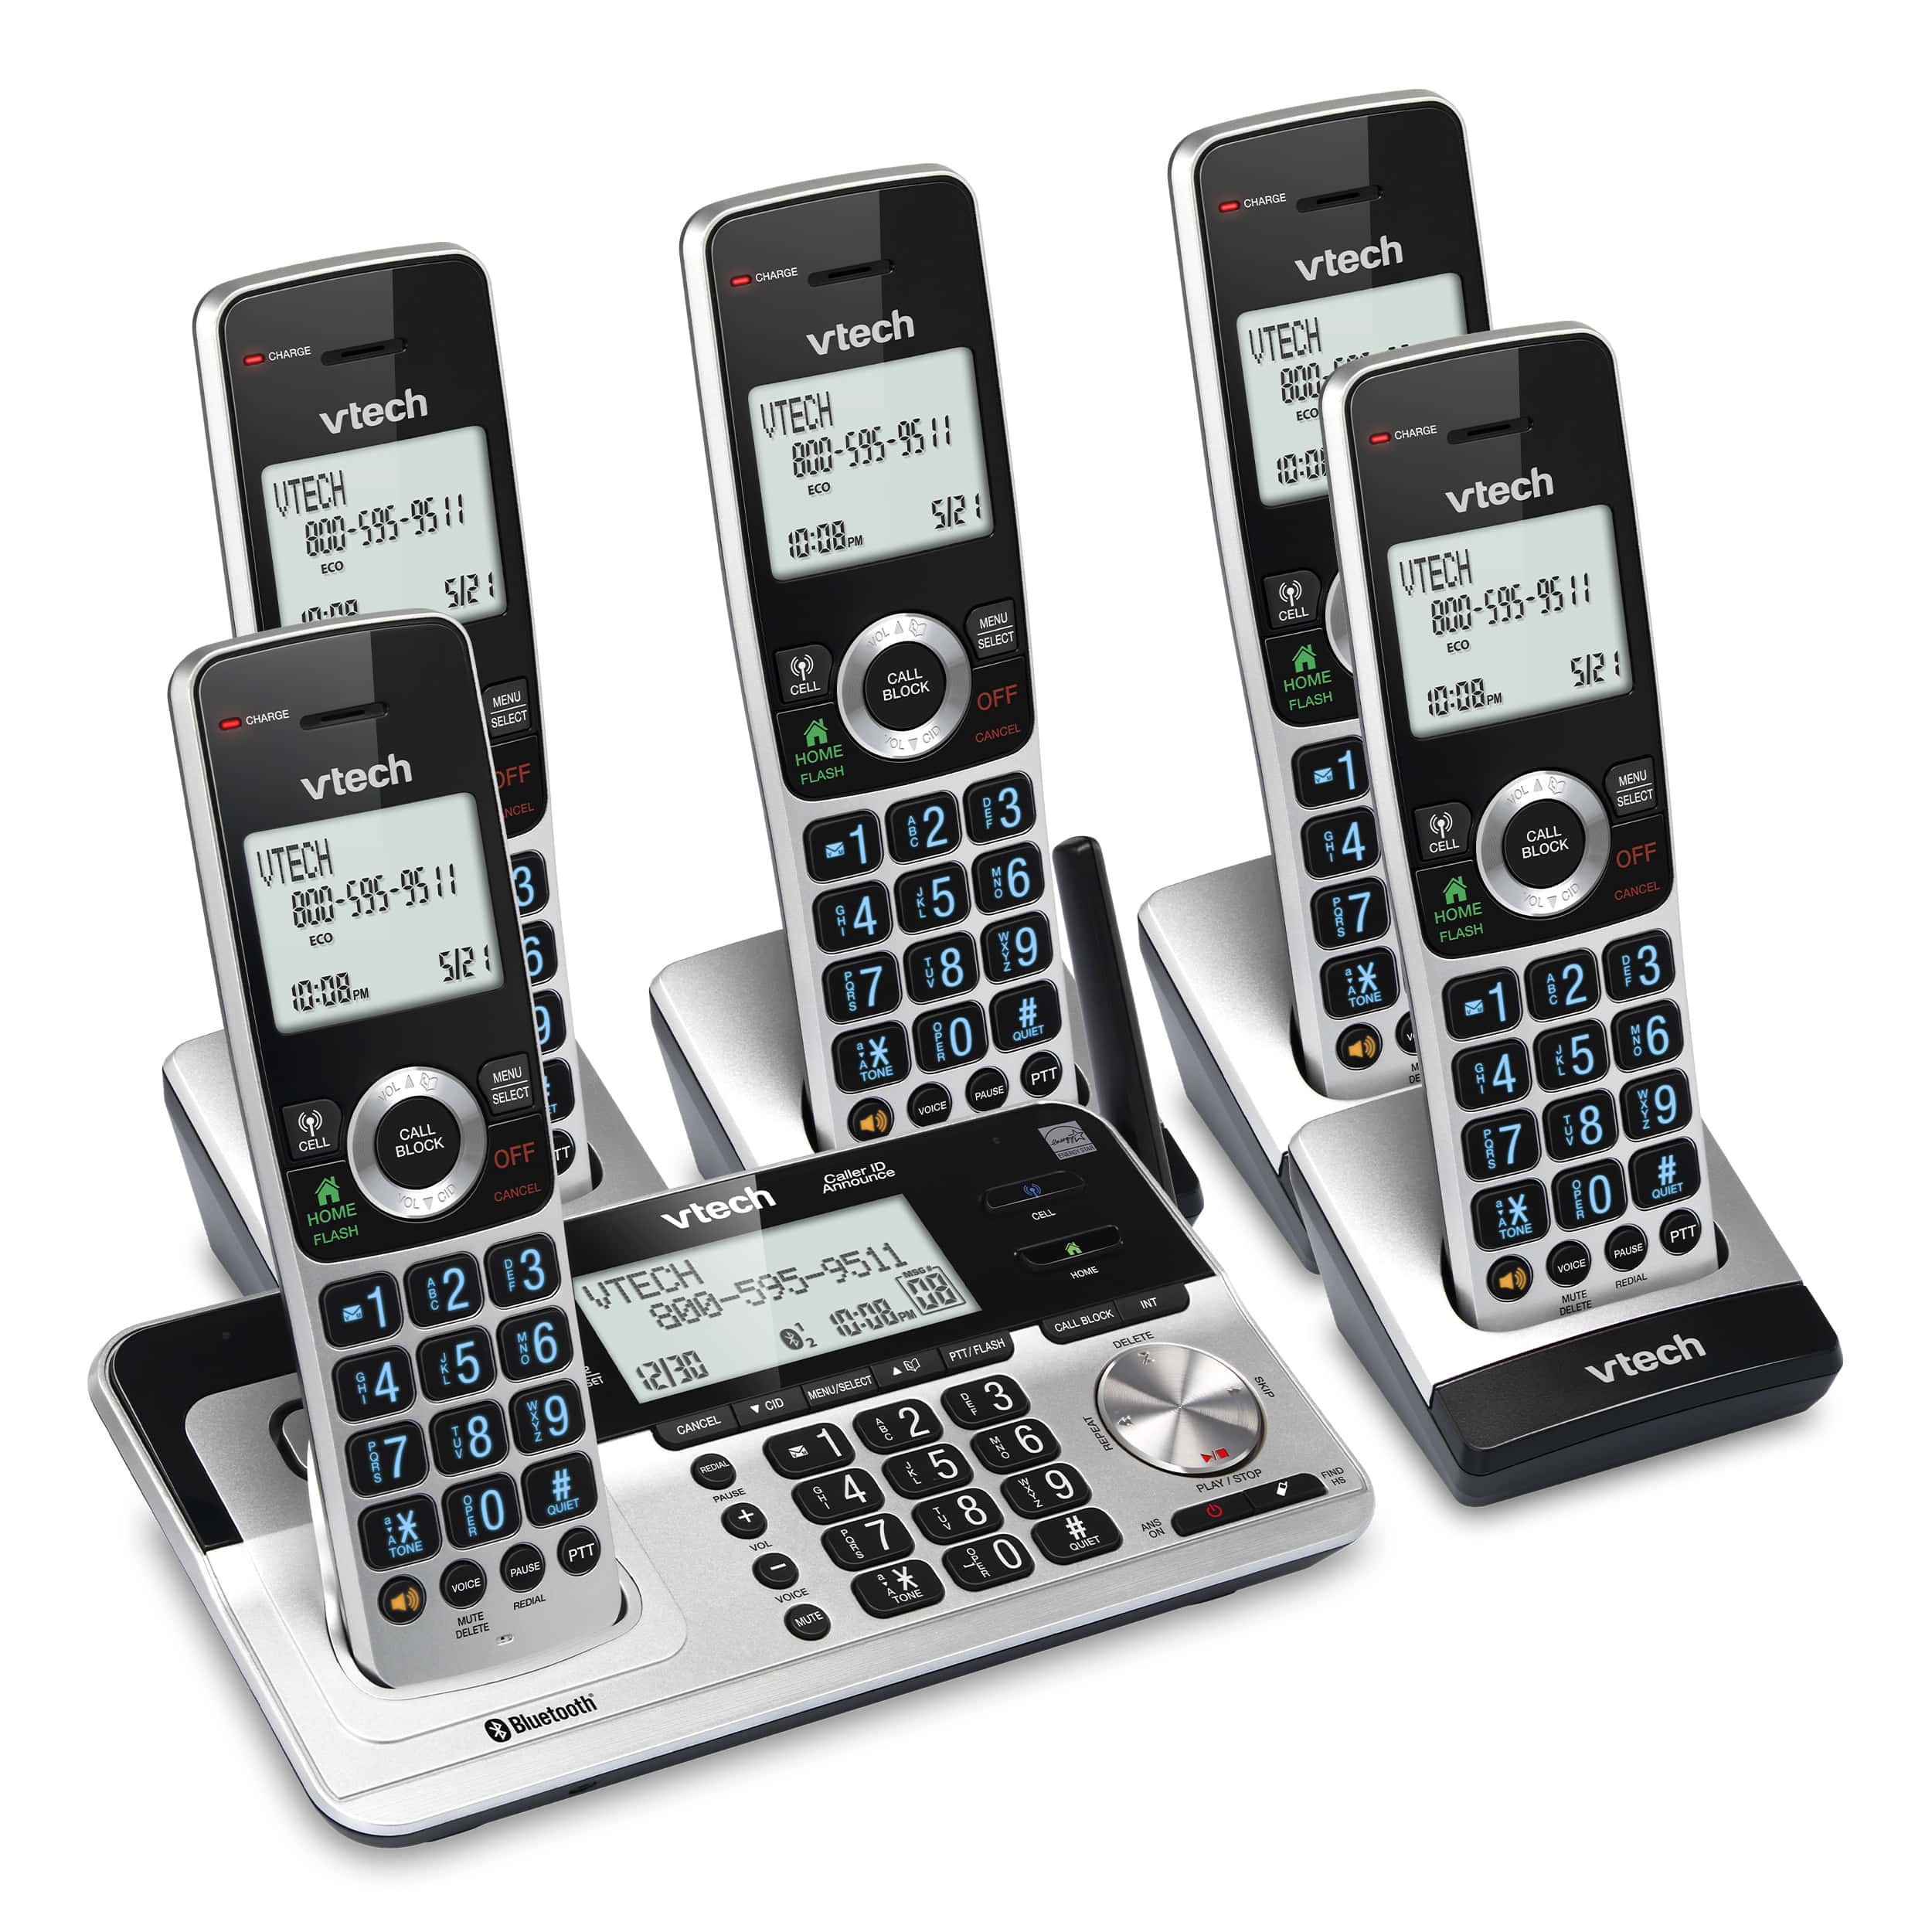 5-Handset Extended Range Expandable Cordless Phone with Bluetooth Connect to Cell, Smart Call Blocker and Answering System